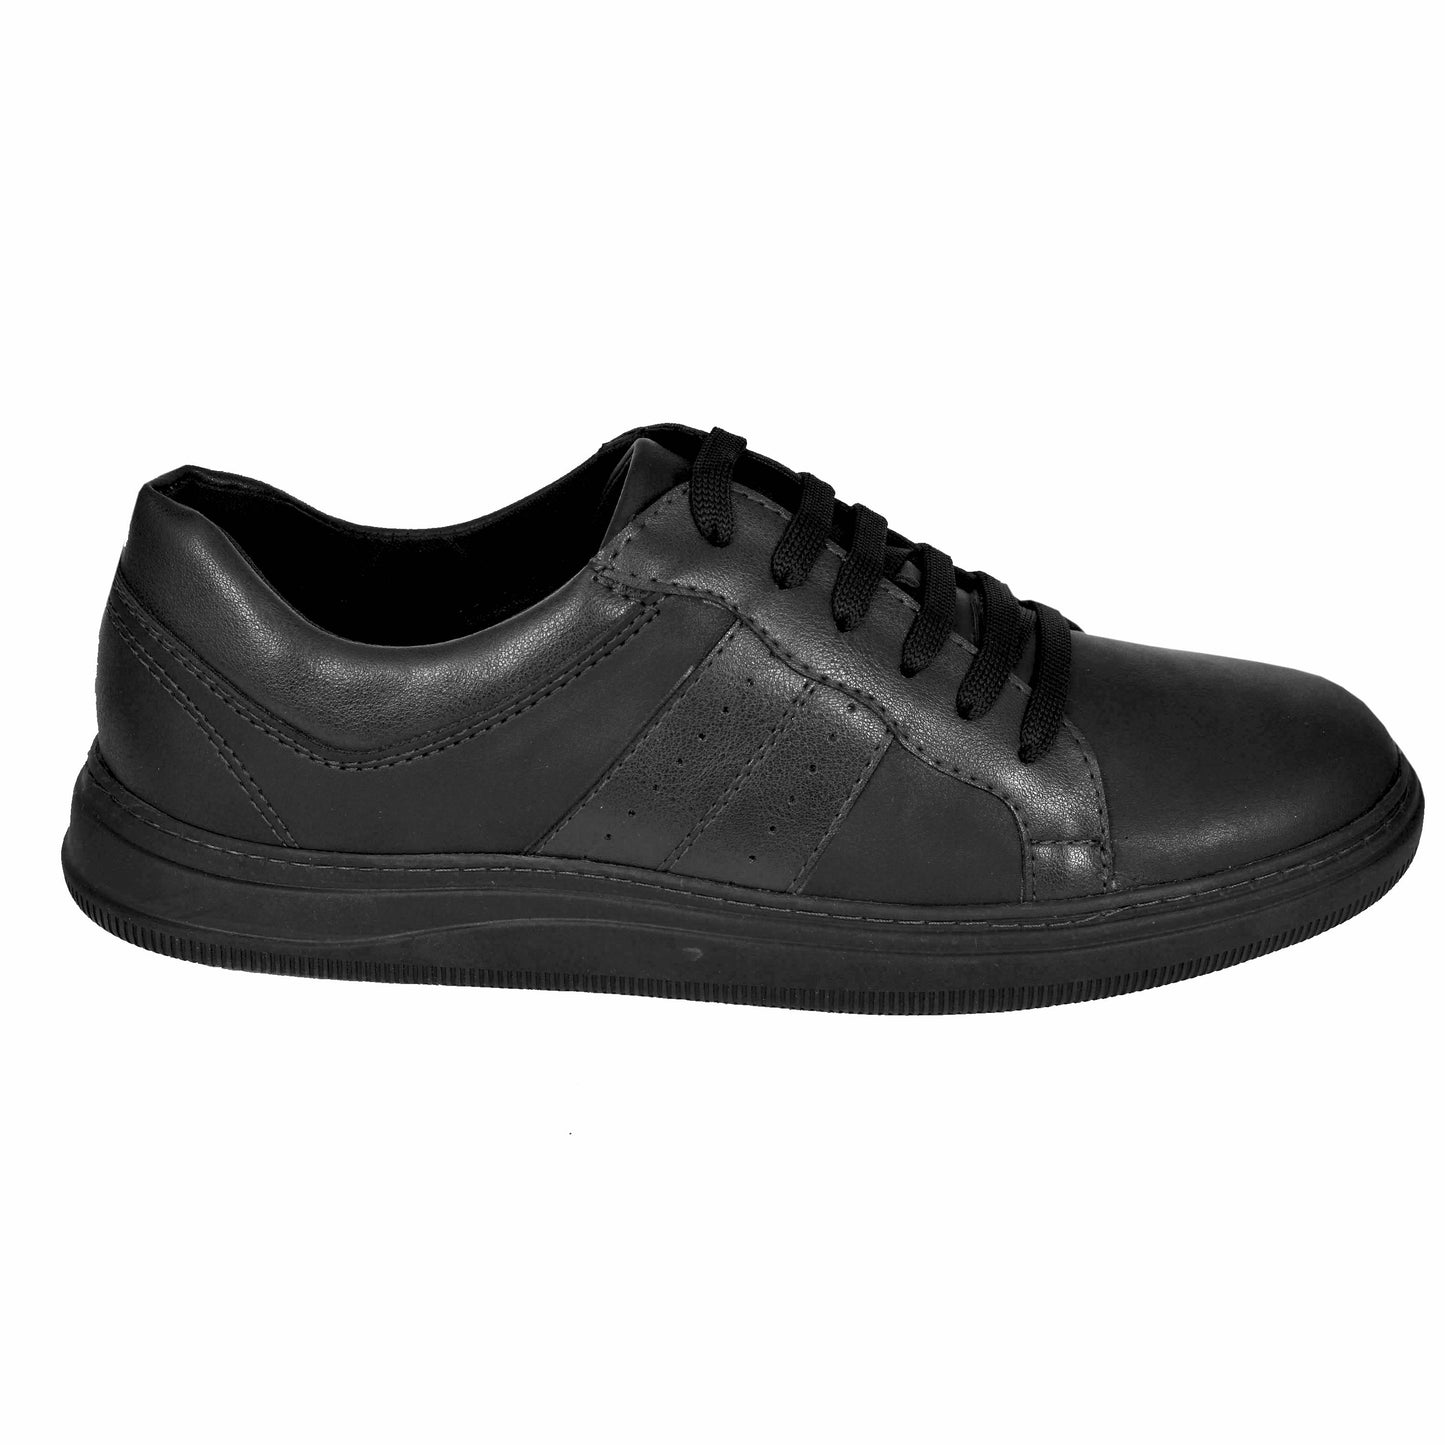 2H #9501 Black Casual Shoes